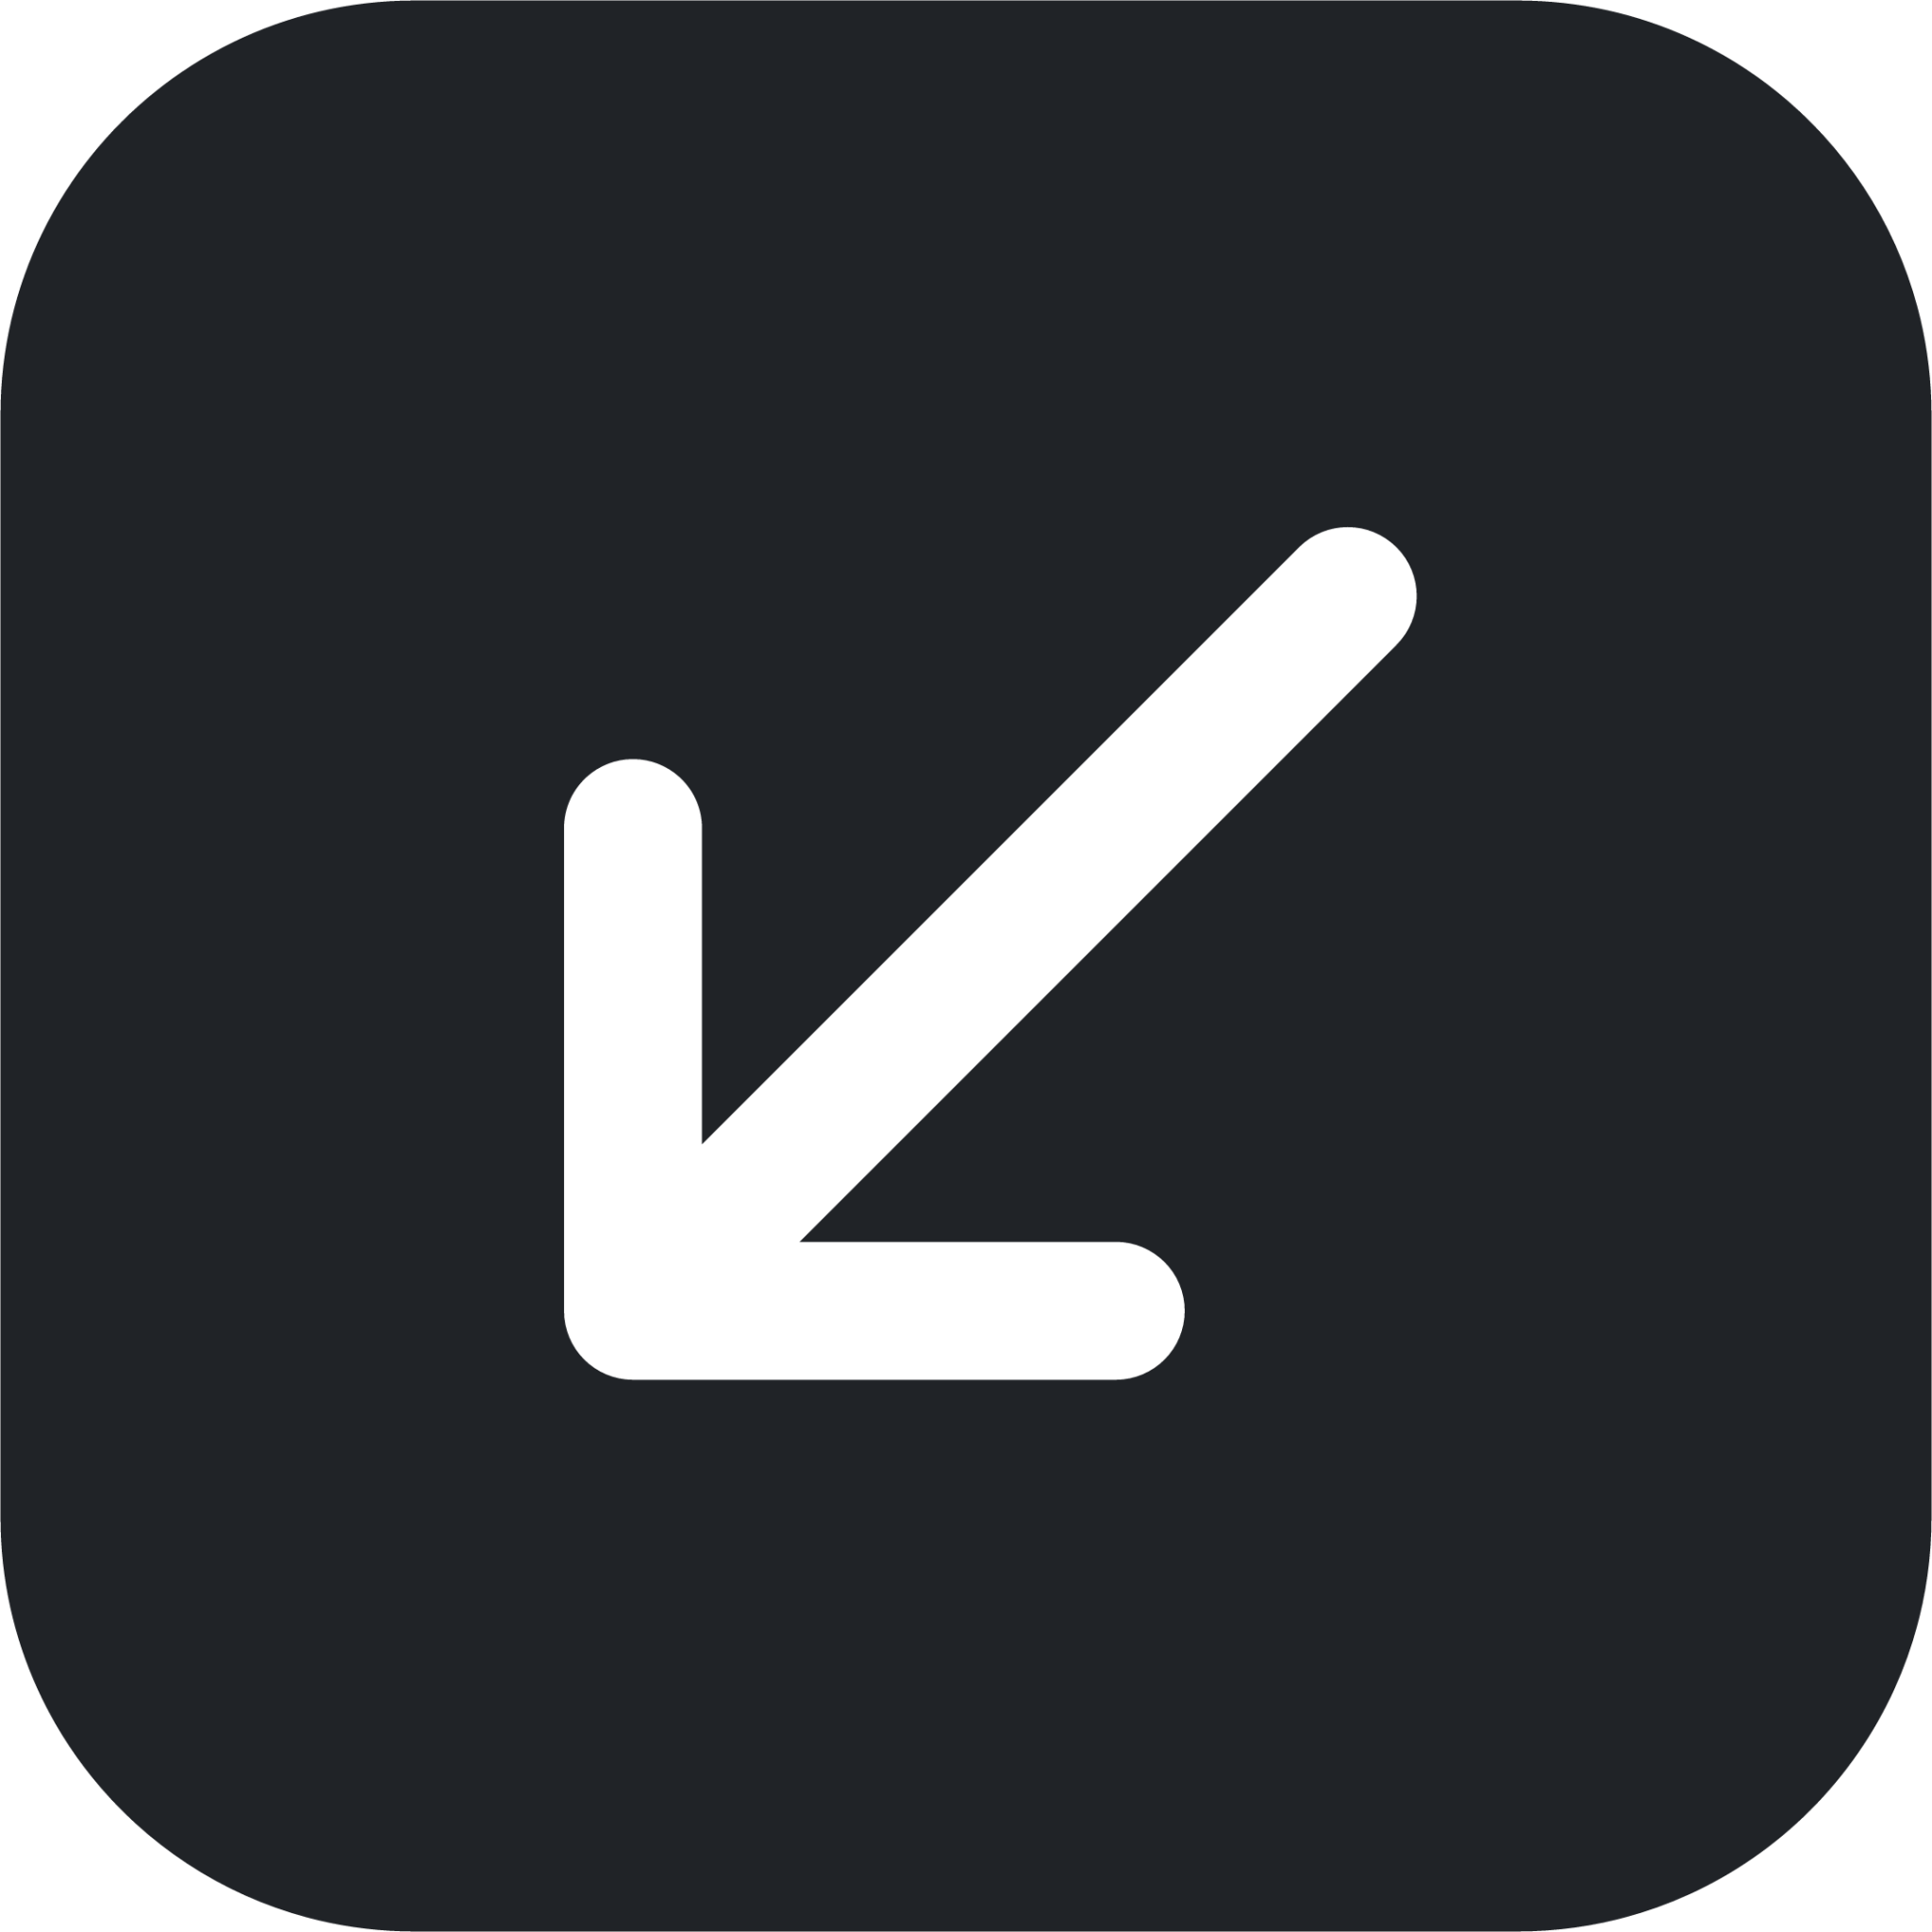 inside (rounded filled) icon